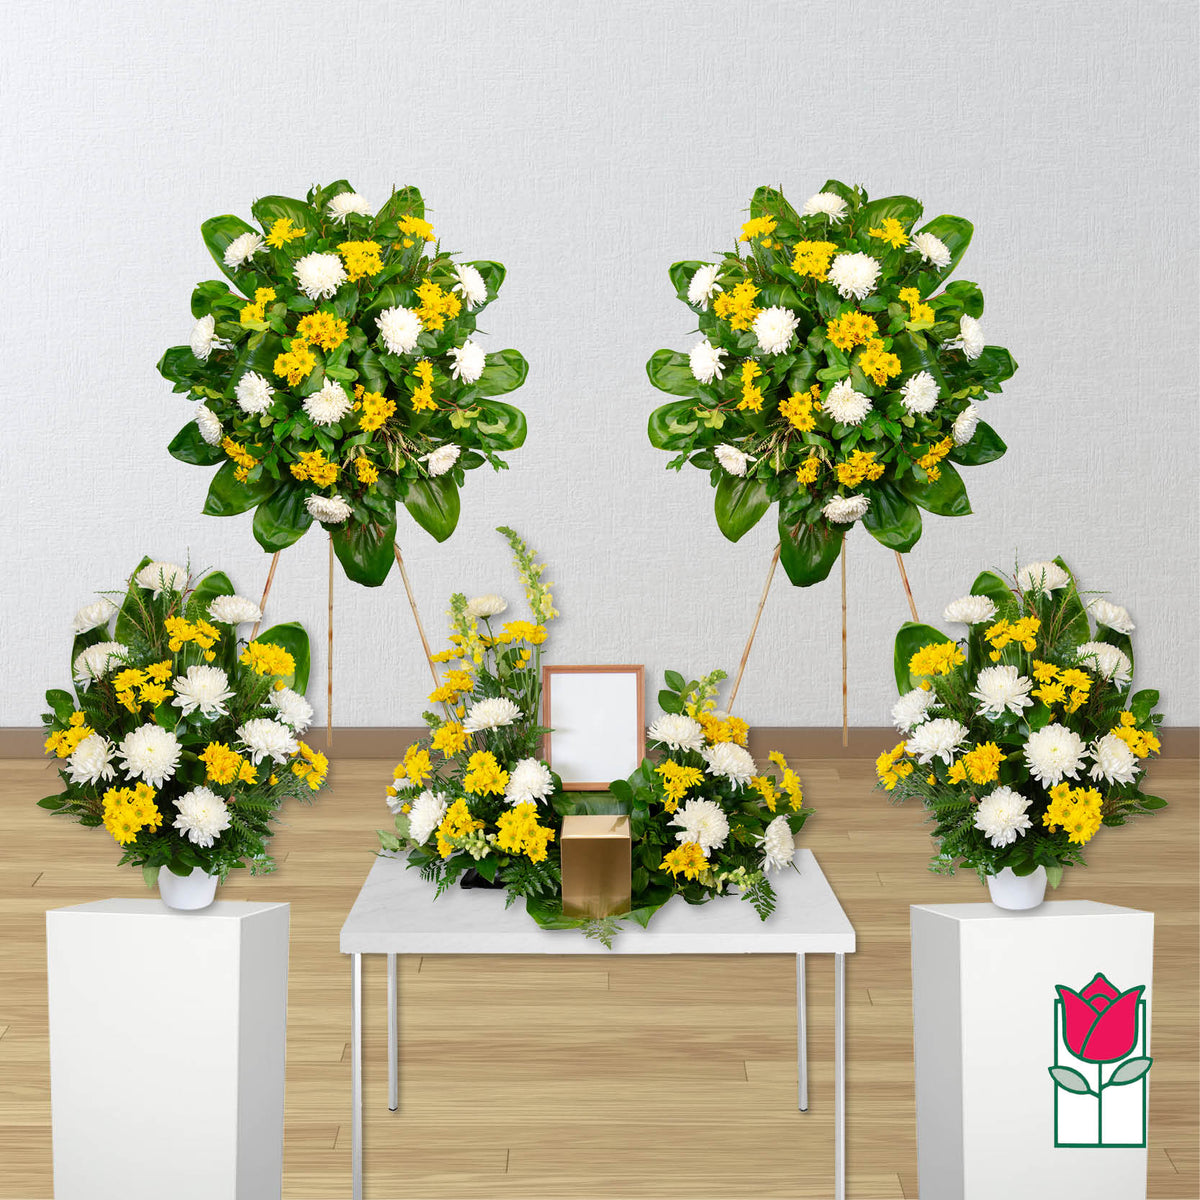 Funeral Flower Packages - Honolulu Hawaii Funeral Delivery Aloha Sympathy Flowers